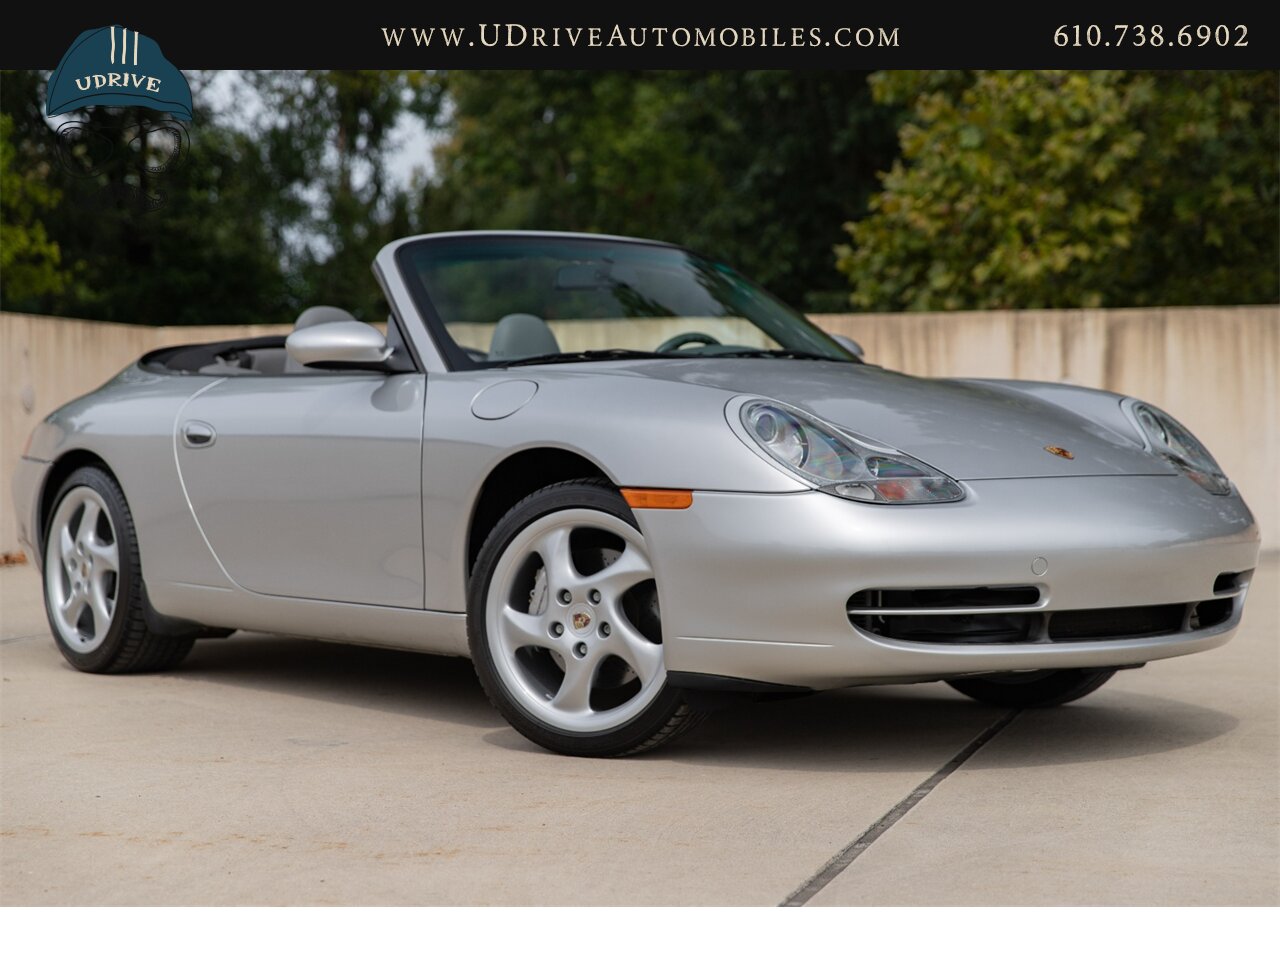 2001 Porsche 911 Carrera 4 Cabriolet Tiptronic IMS Upgrade  Power Seats 18in Turbo Look Wheels 2 Owners $5k Recent Service - Photo 6 - West Chester, PA 19382